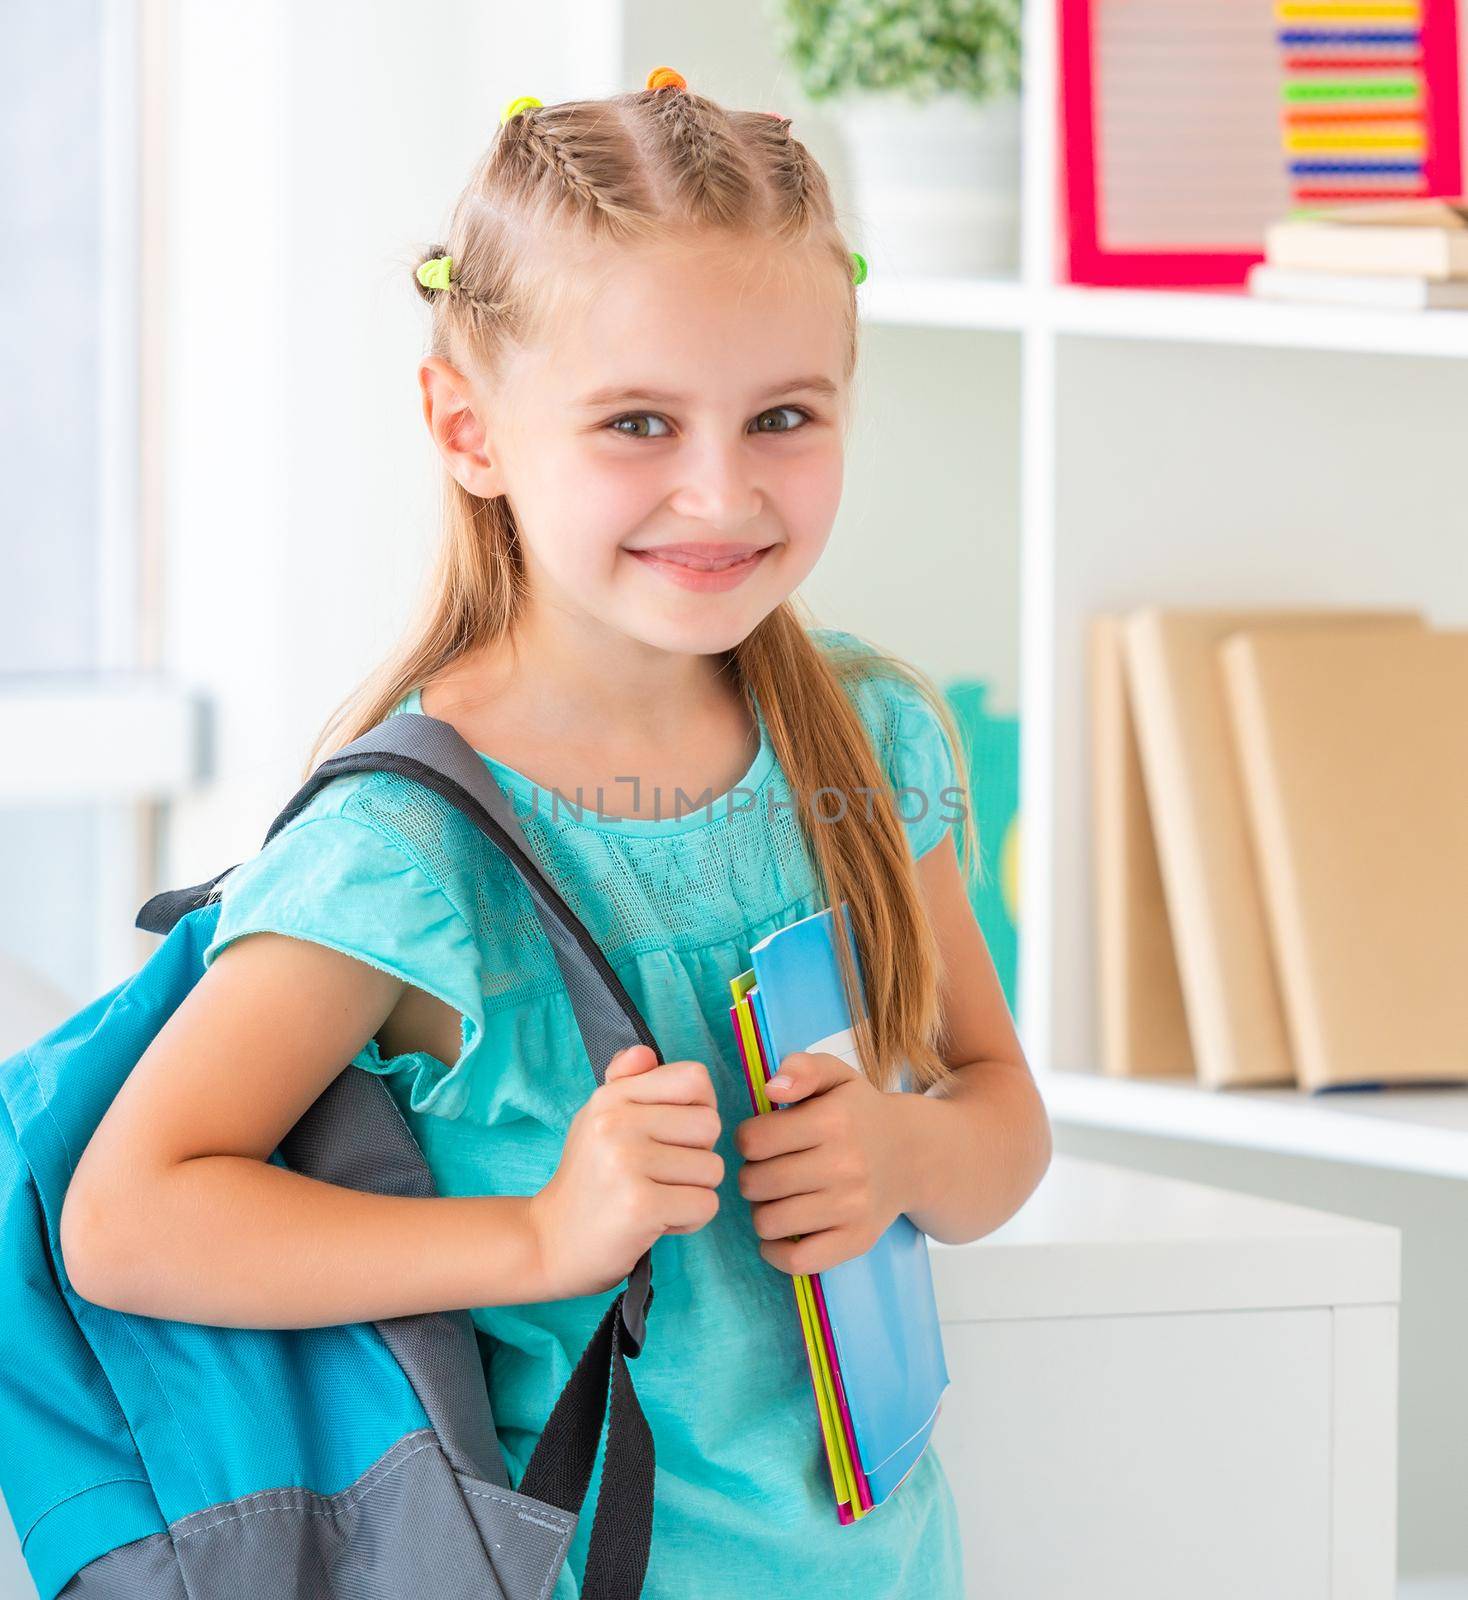 Smiling funny active little girl is ready for school again, holding new blue backpack and notebooks